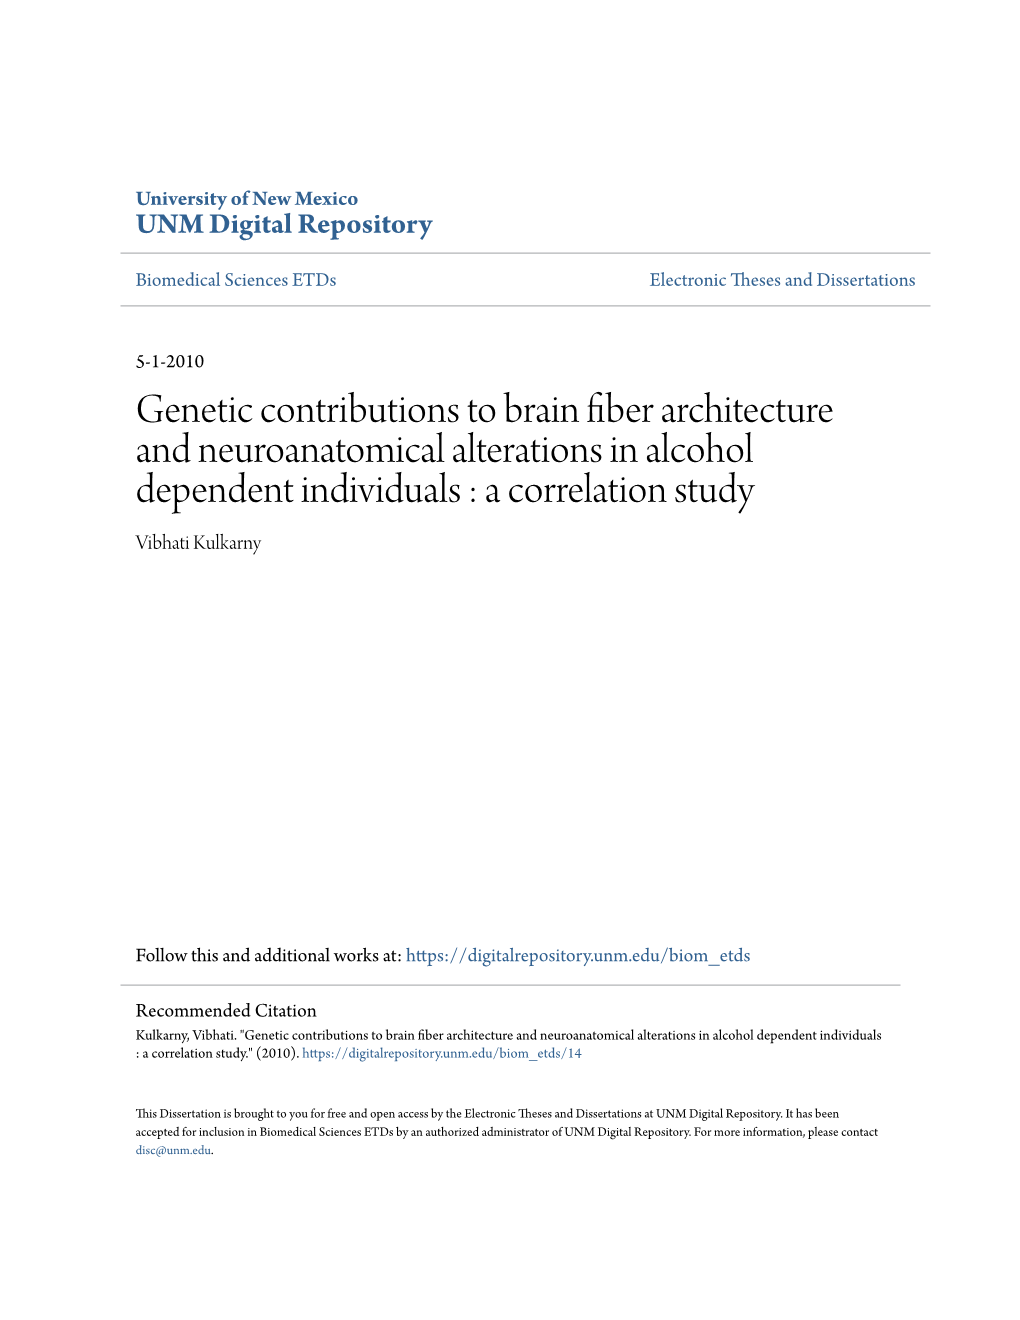 Genetic Contributions to Brain Fiber Architecture and Neuroanatomical Alterations in Alcohol Dependent Individuals : a Correlation Study Vibhati Kulkarny